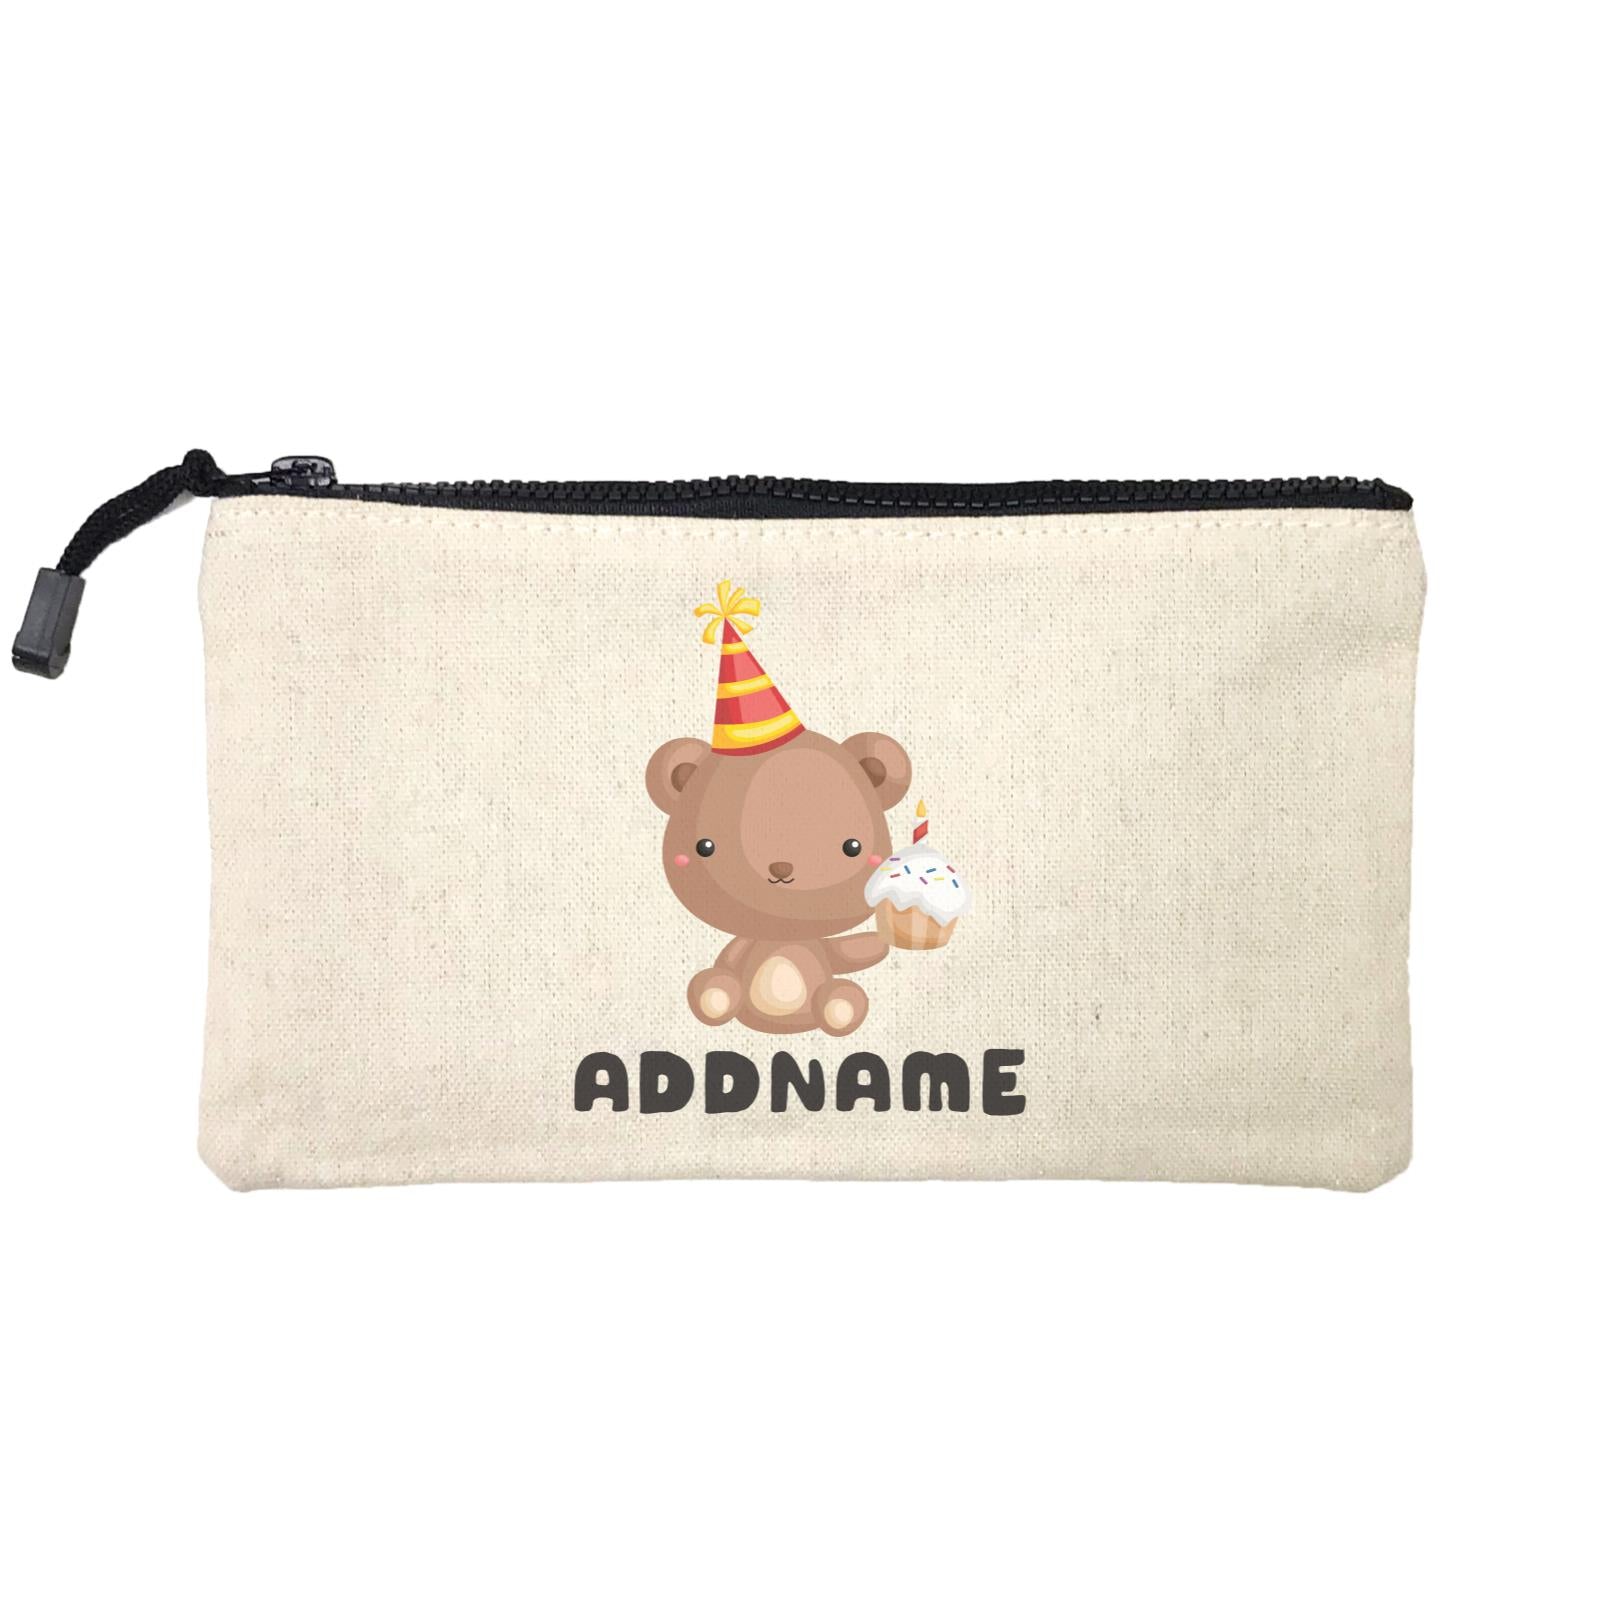 Birthday Friendly Animals Bear Holding Cupcake Addname Mini Accessories Stationery Pouch